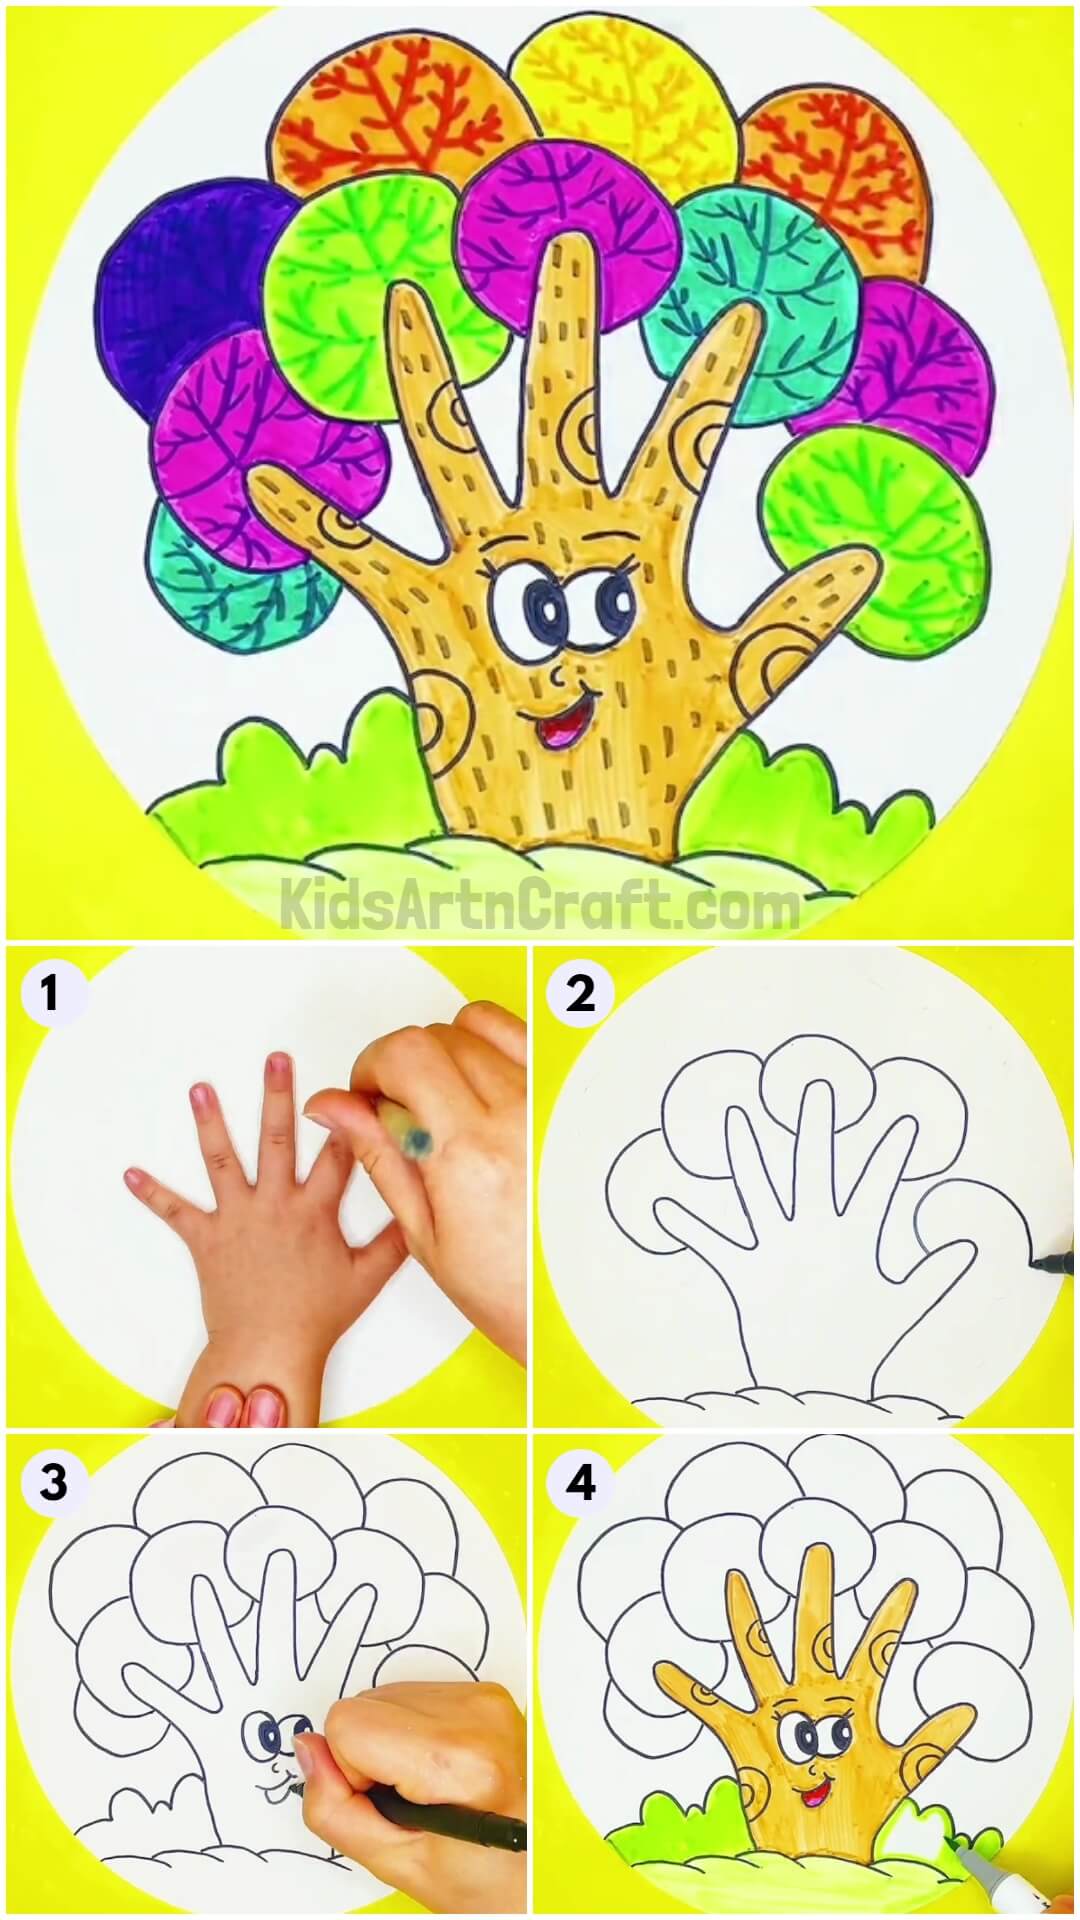 How To Make Tree From Hand Outline Step by Step Tutorial